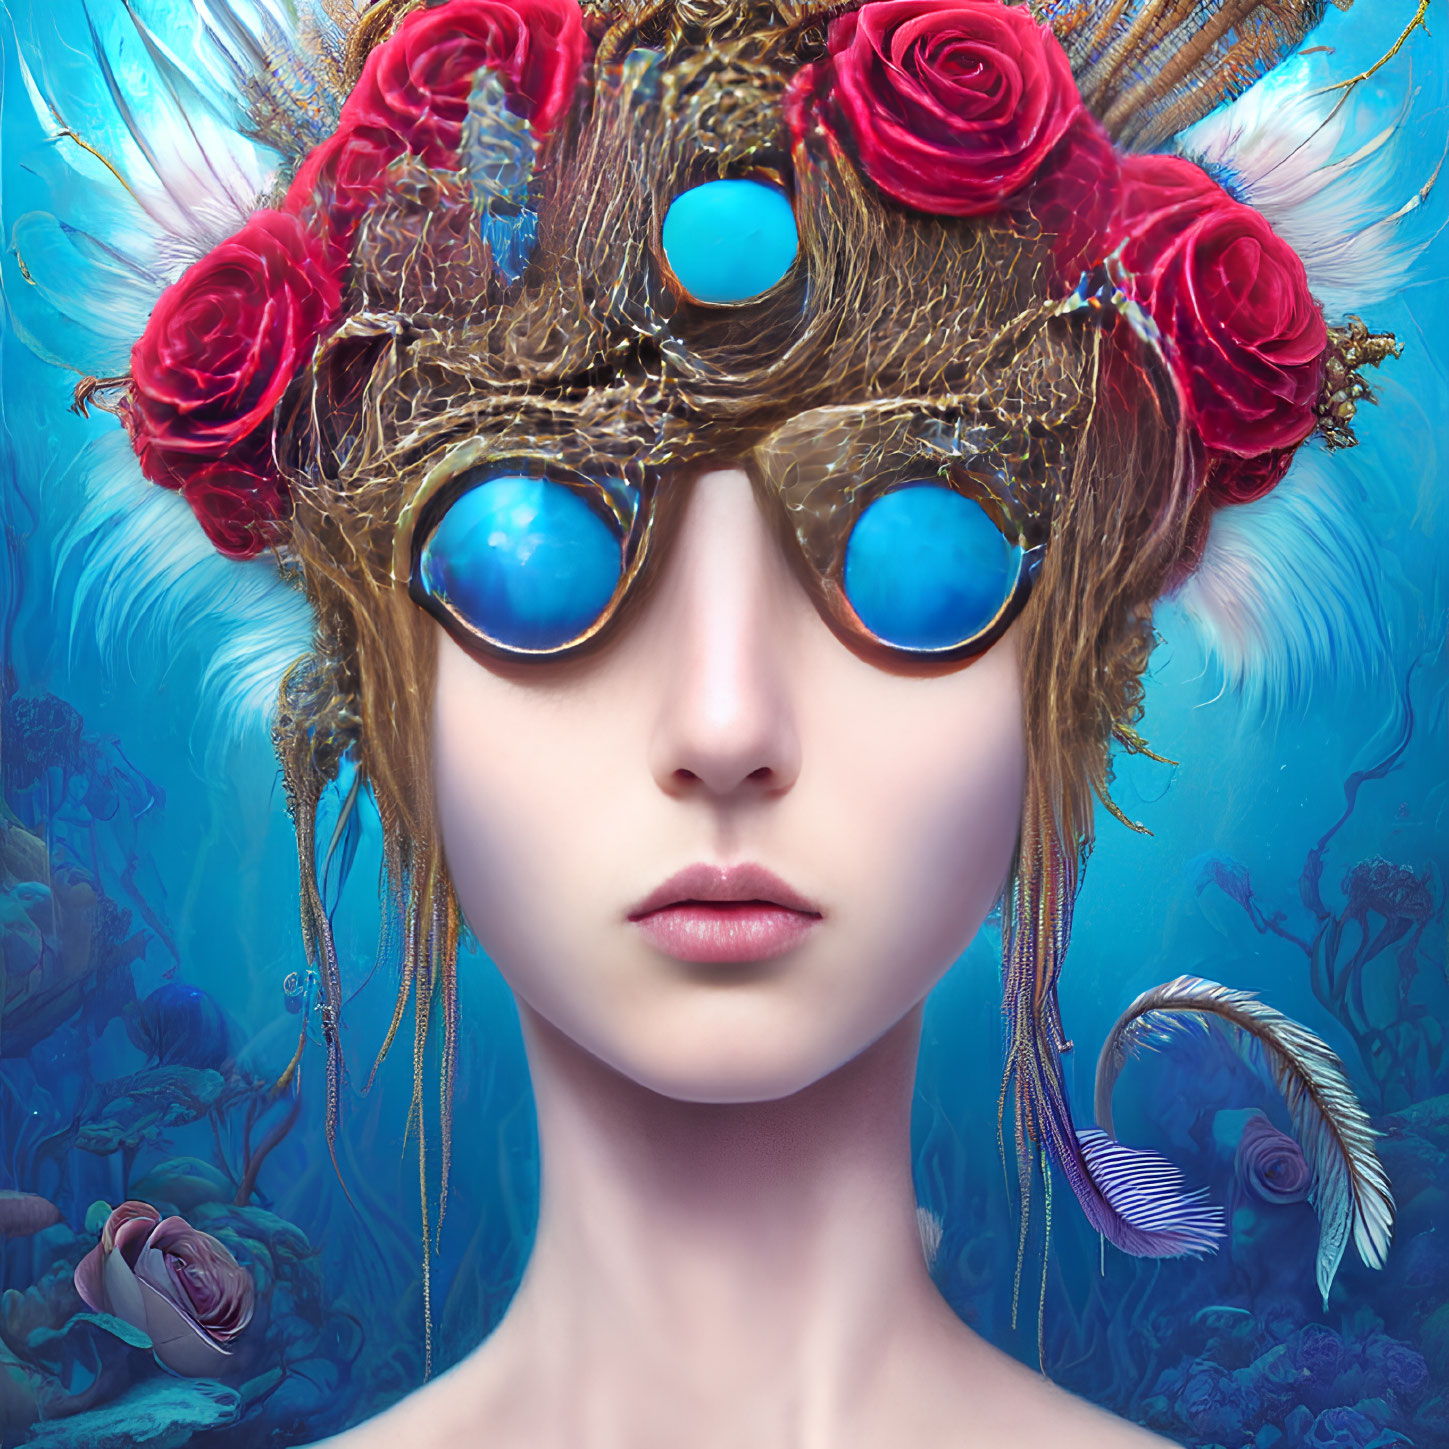 Fantastical underwater portrait of a female figure with crown of roses and feathers